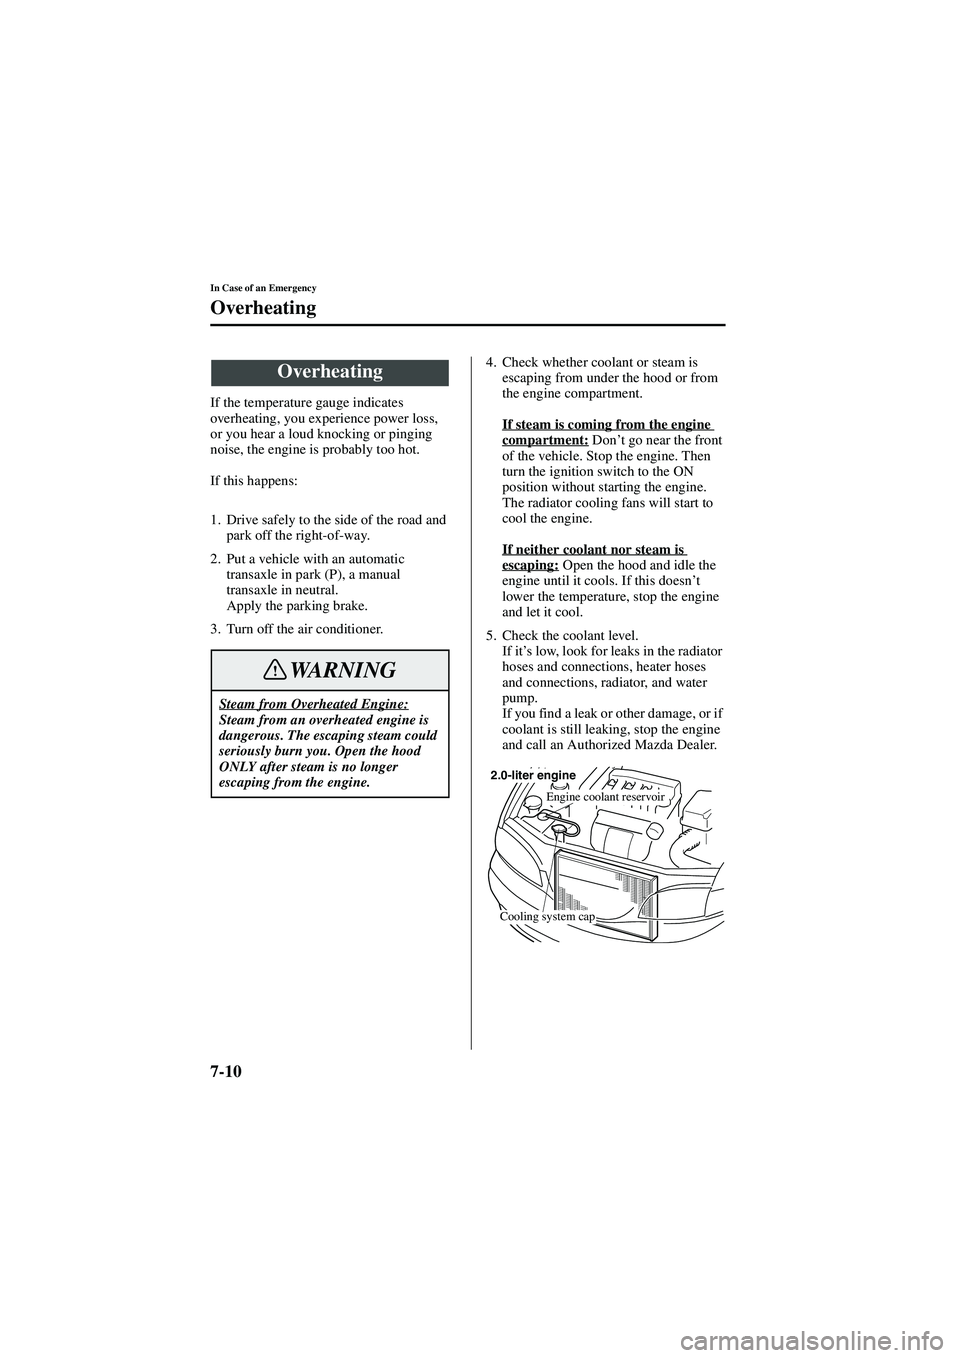 MAZDA MODEL 626 2002  Owners Manual 7-10
In Case of an Emergency
Form No. 8Q50-EA-01G
Overheating
If the temperature gauge indicates 
overheating, you experience power loss, 
or you hear a loud knocking or pinging 
noise, the engine is 